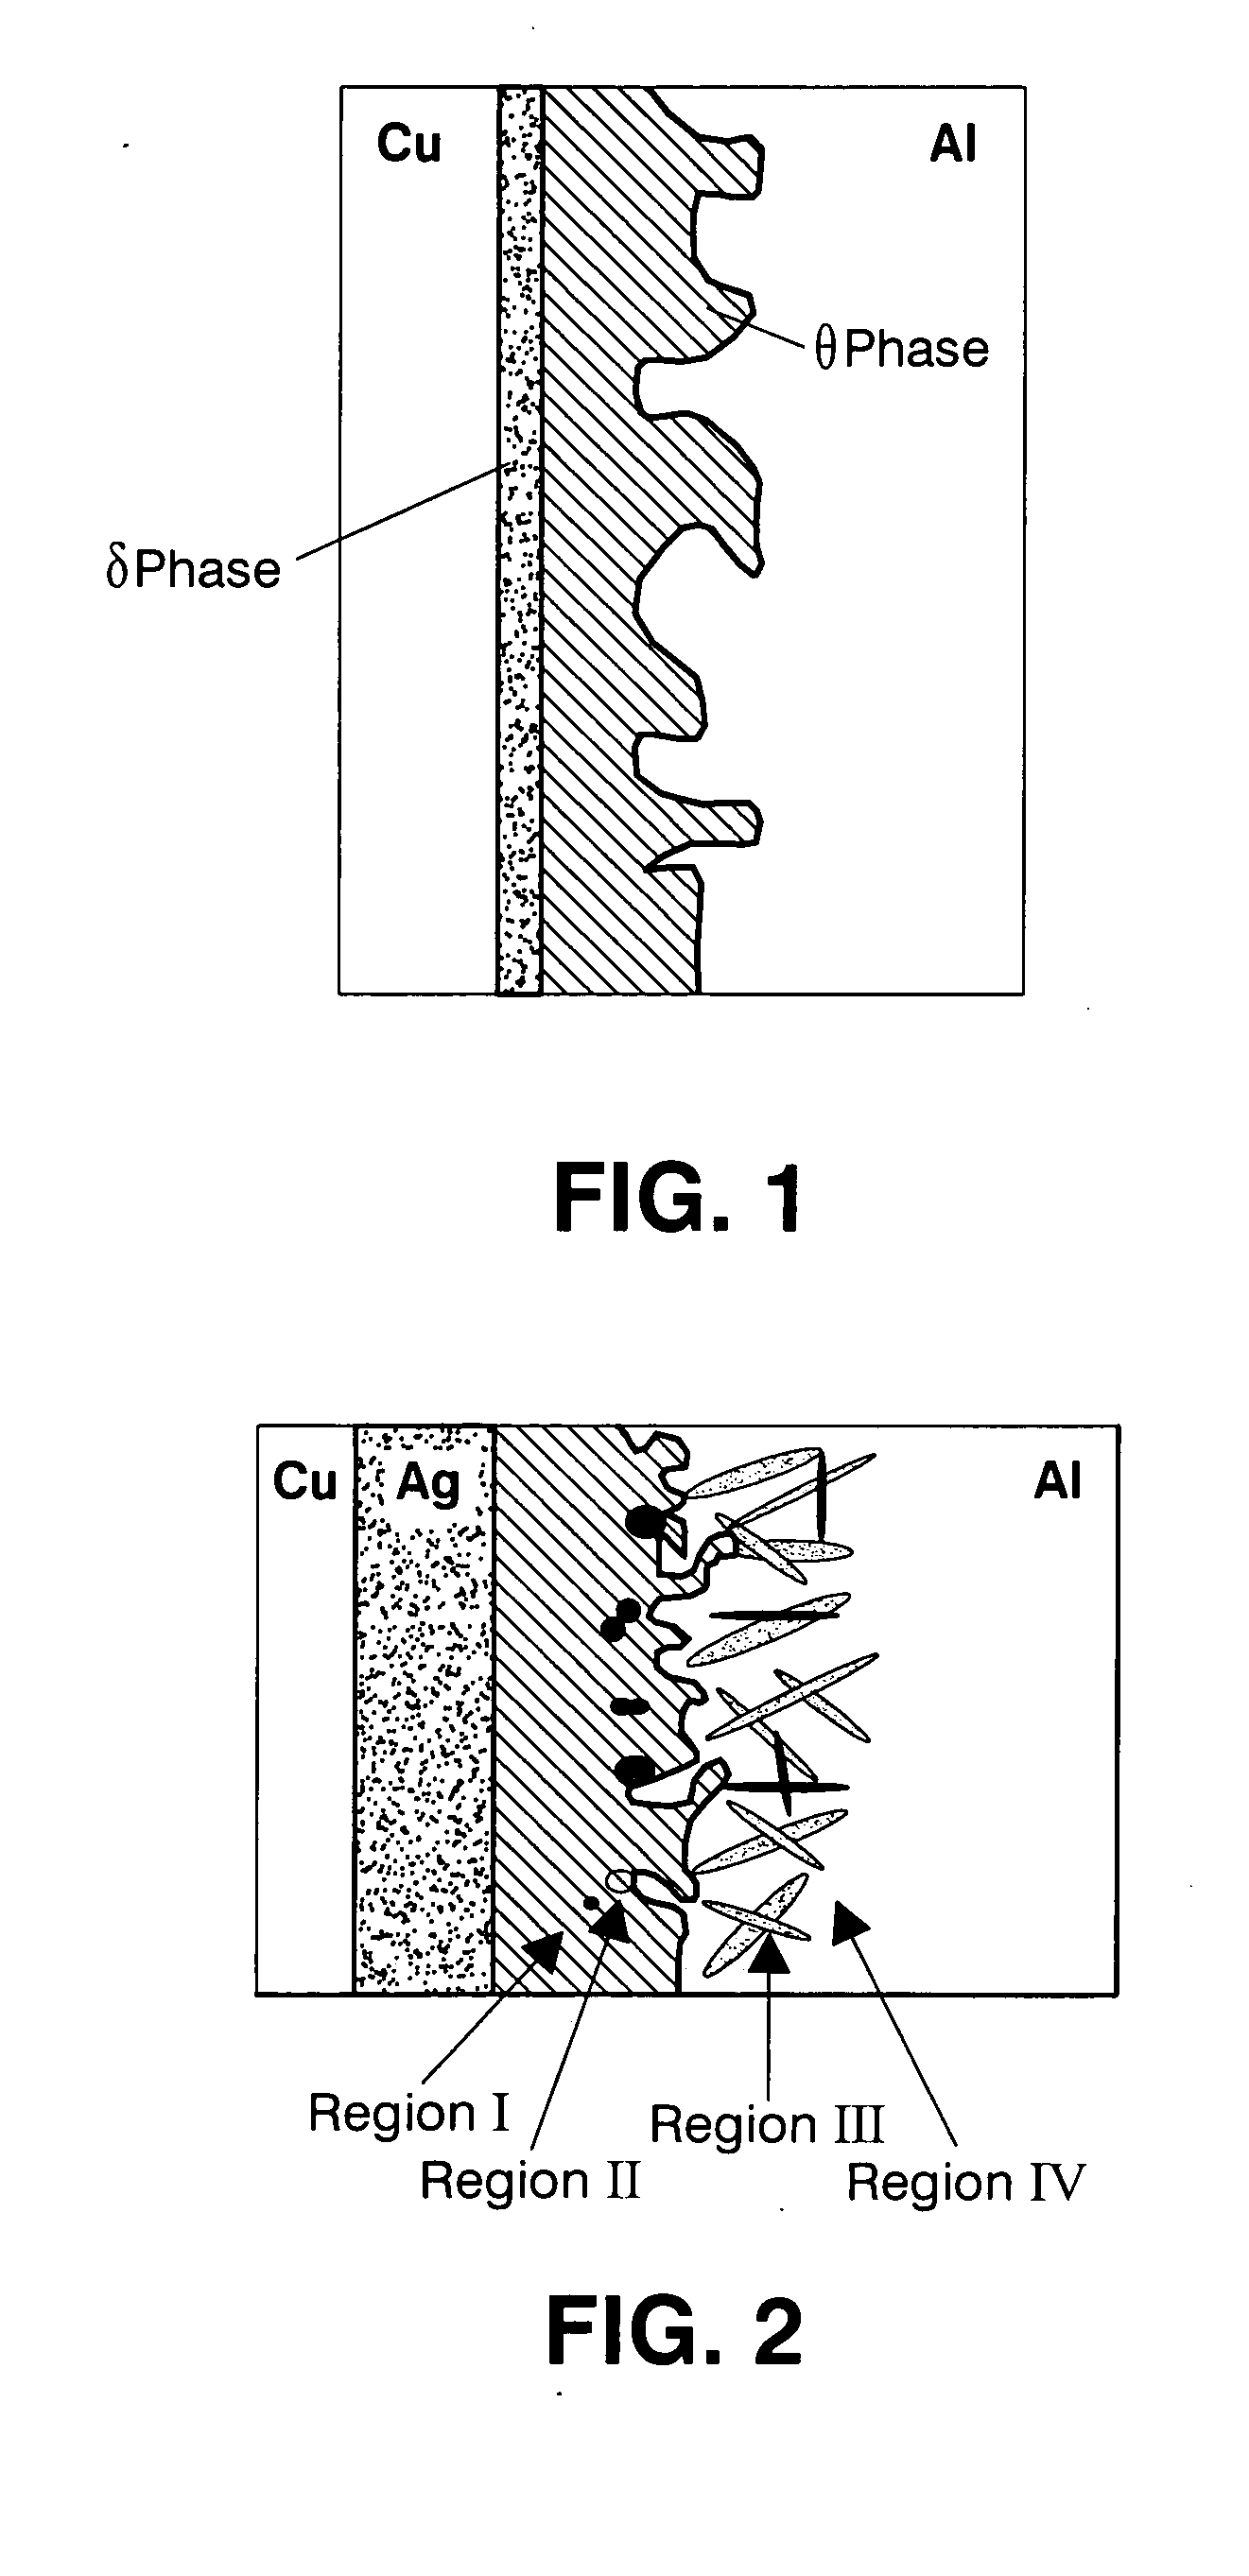 Al-Cu bonded structure and method for making the same